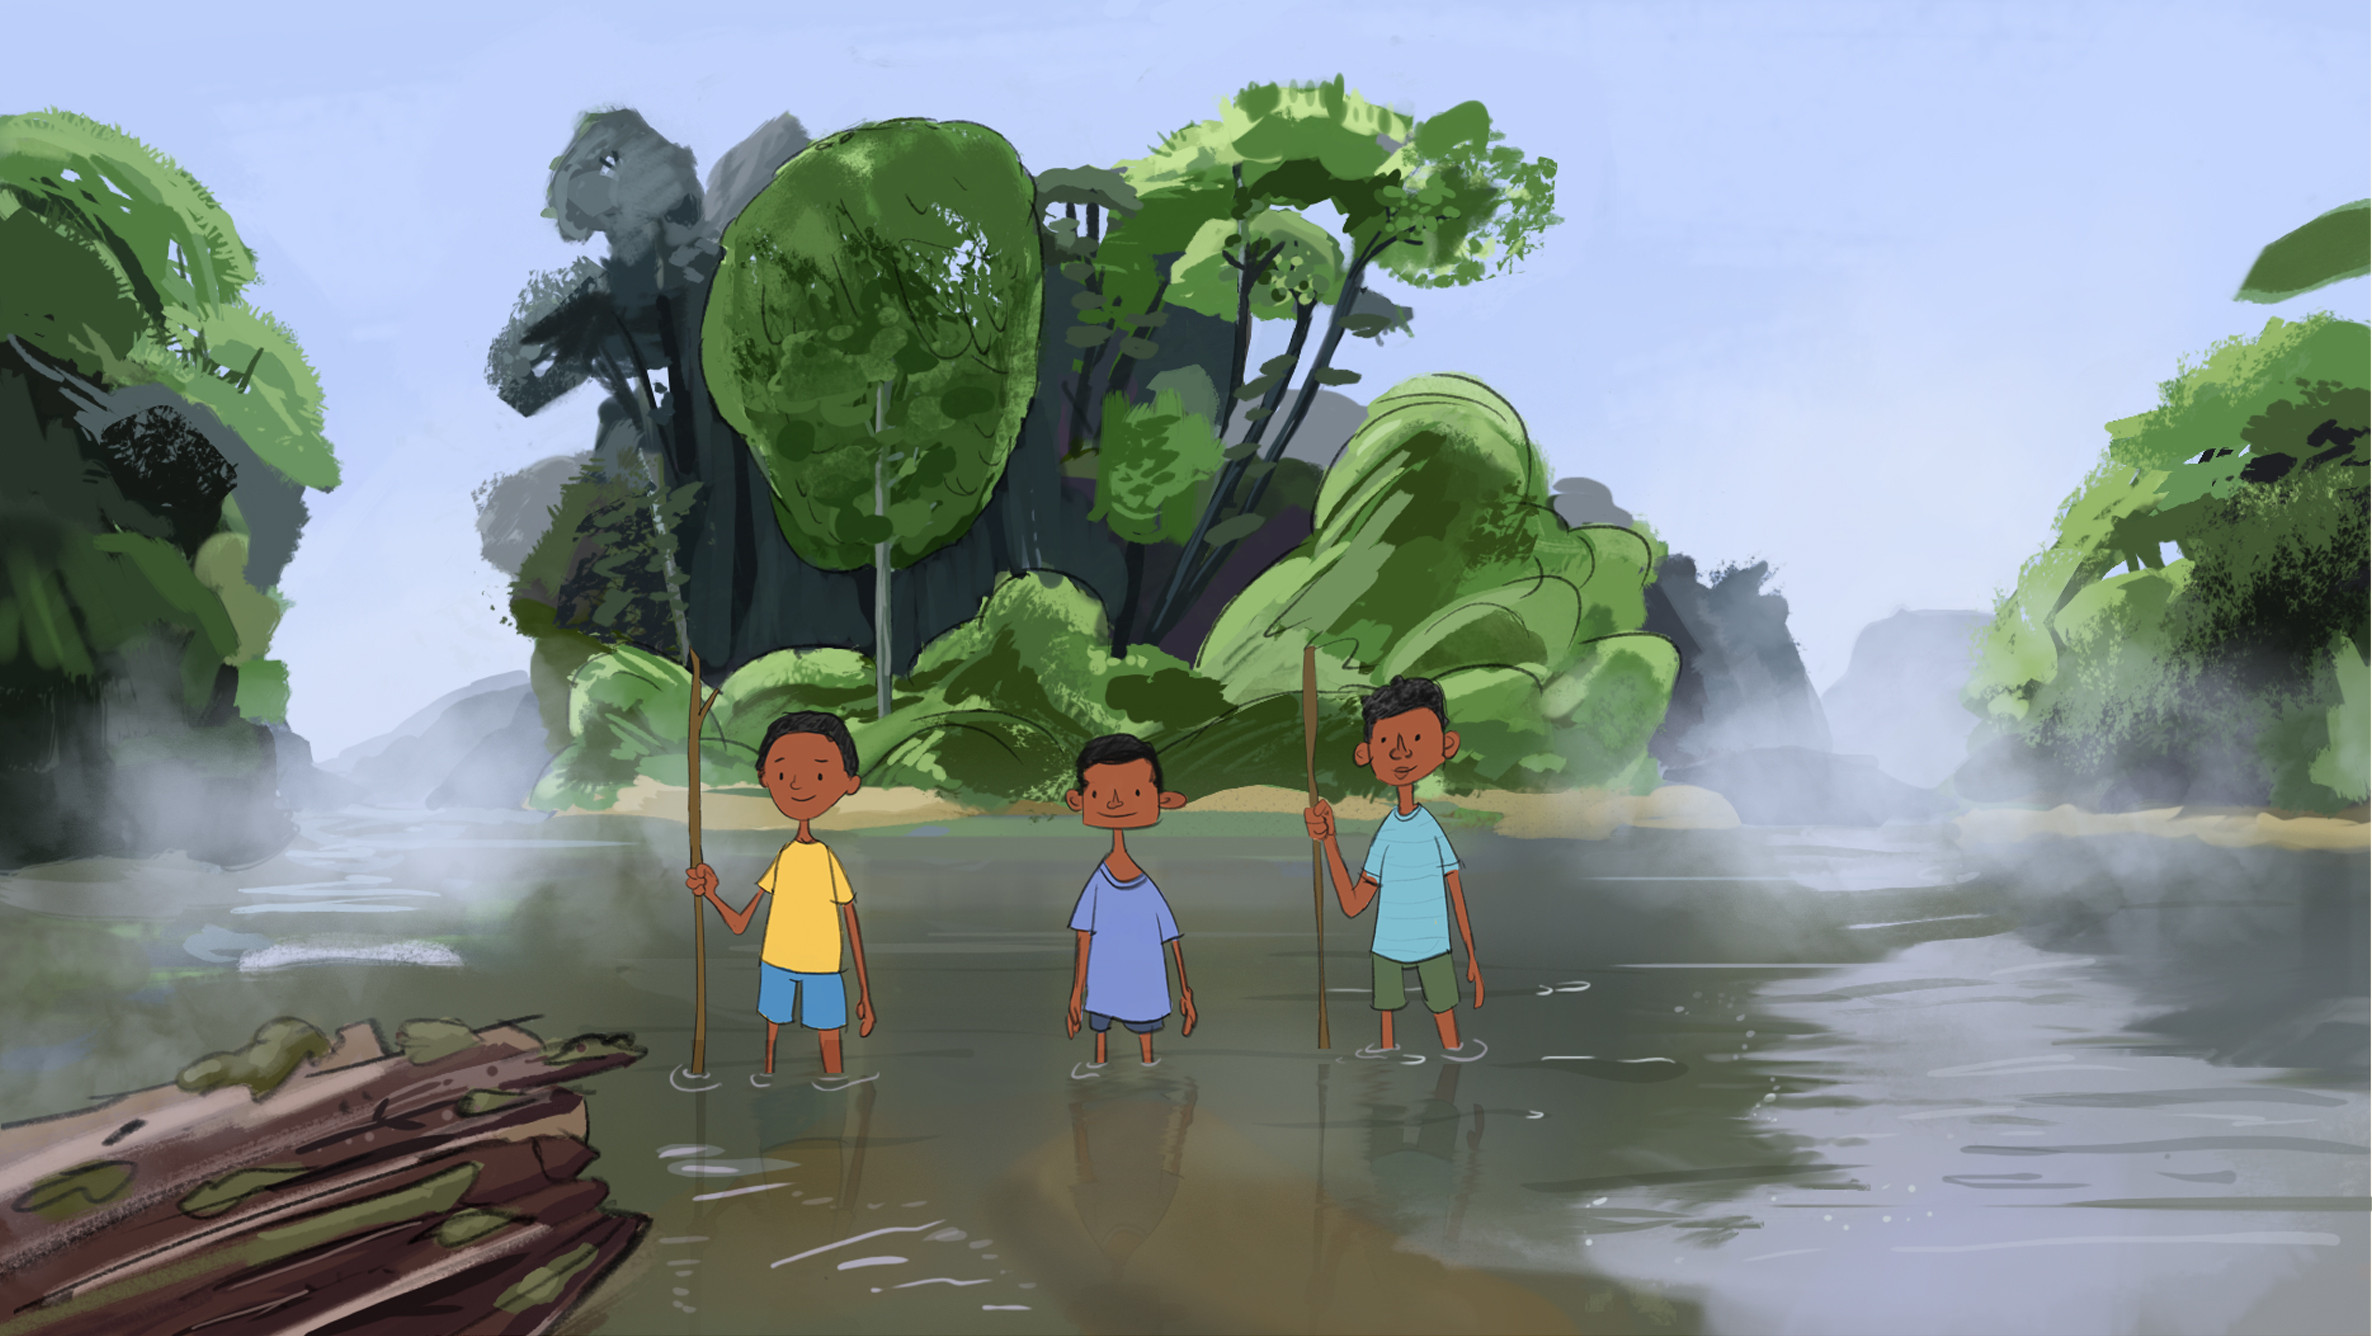 Our protagonists fishing - background and key frame illustration